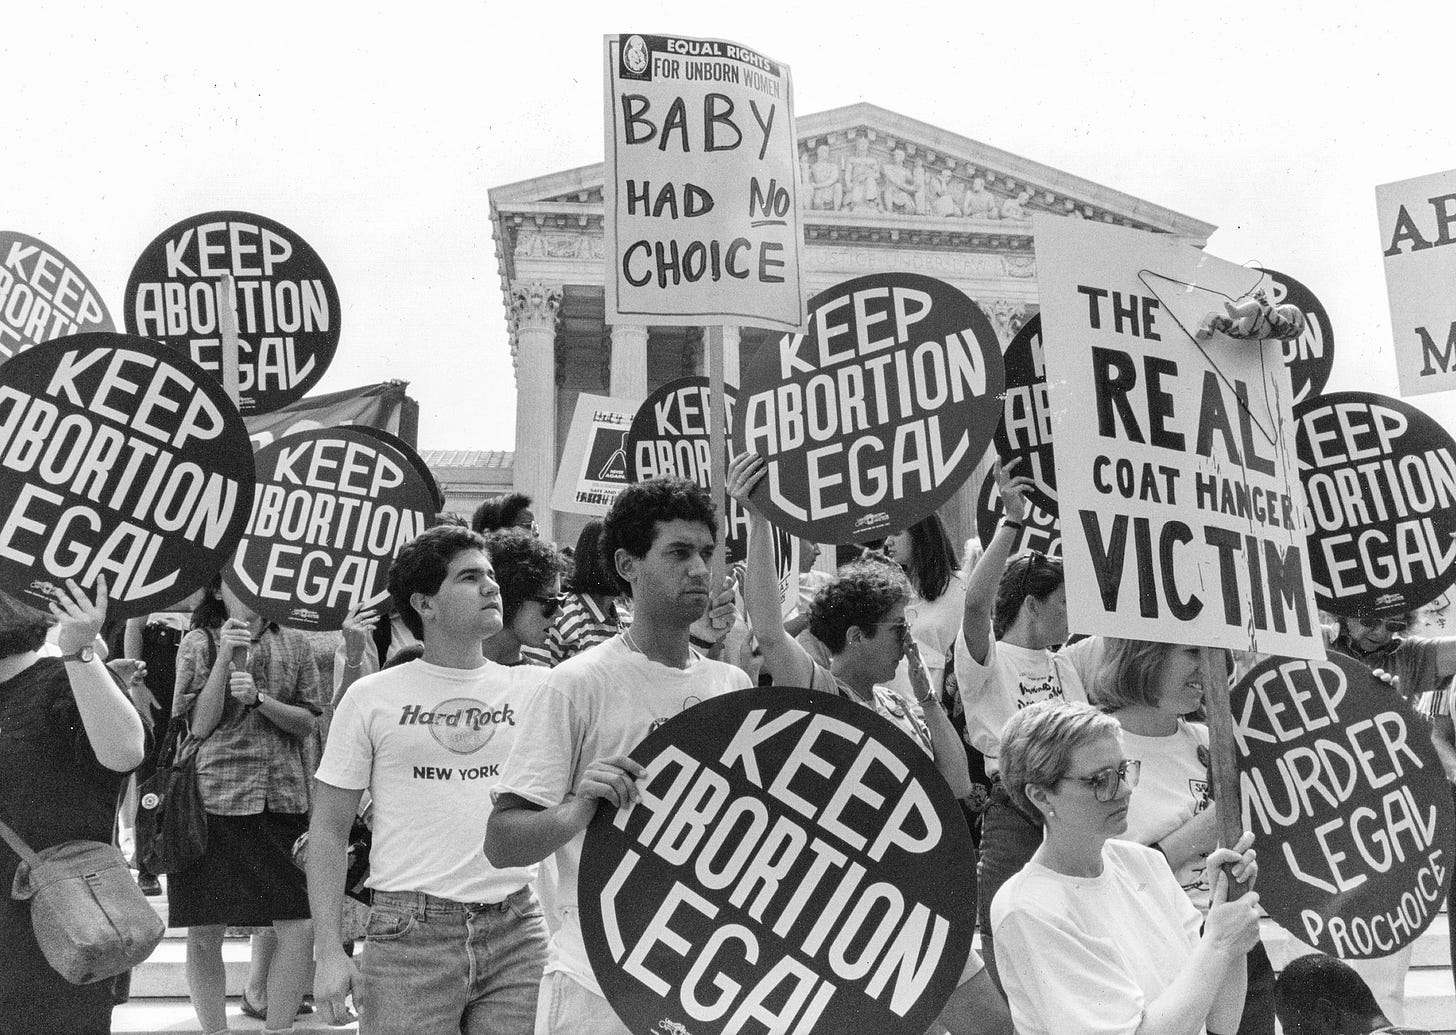 Protesters stand outside the Supreme Court holding signs that read "Keep Abortion Legal," "Baby had no cnoice" and "The real coat hanger victim"